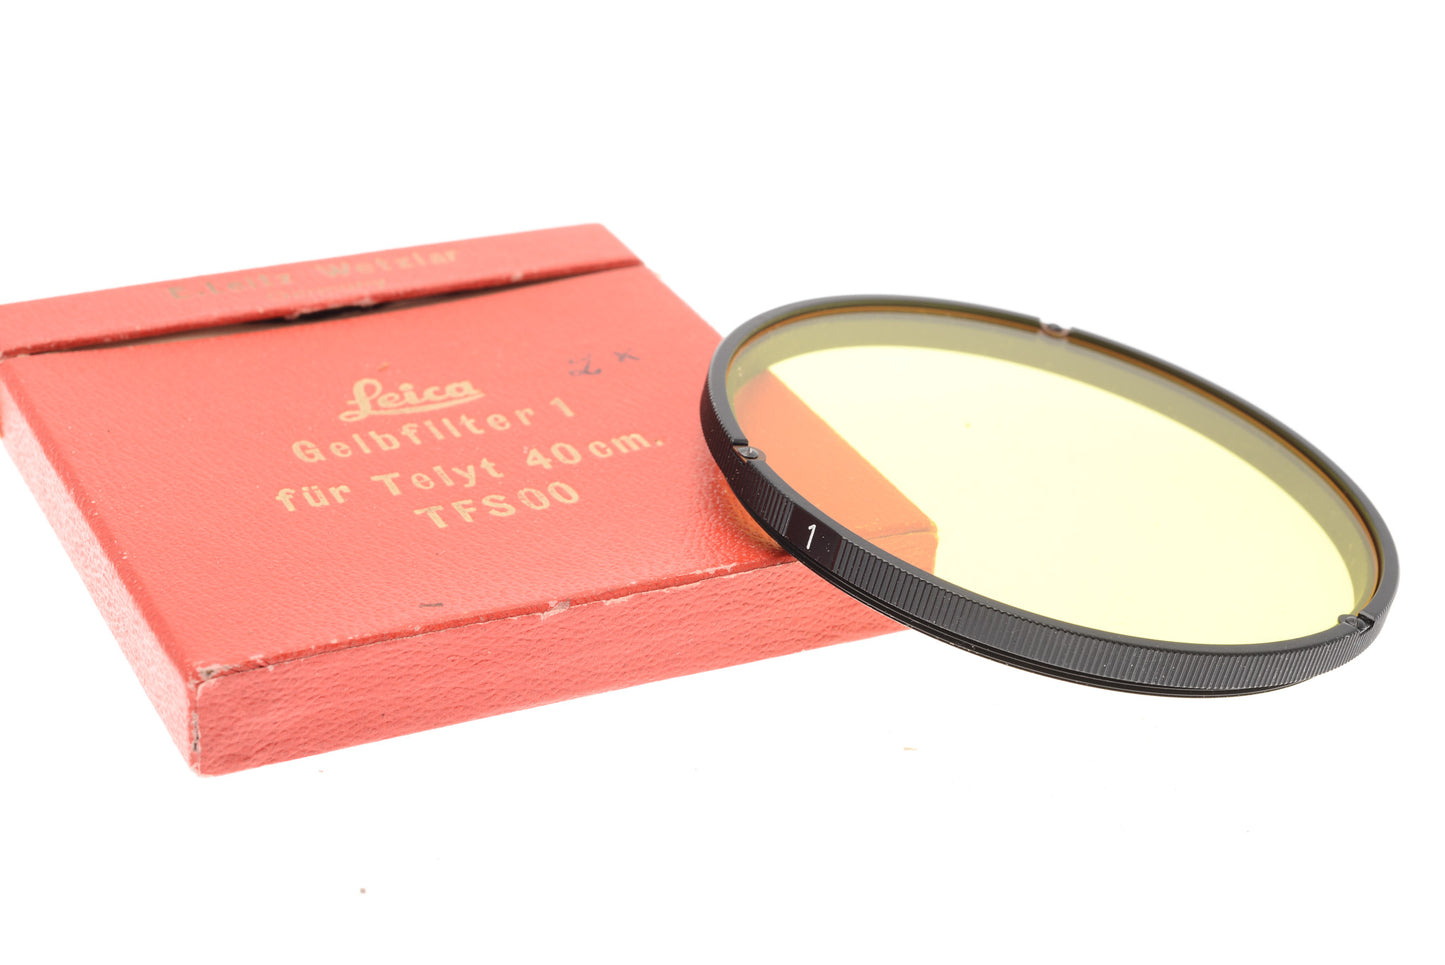 Leica Gelbfilter 1 (Yellow) for Telyt 40cm (TFSOO) - Accessory